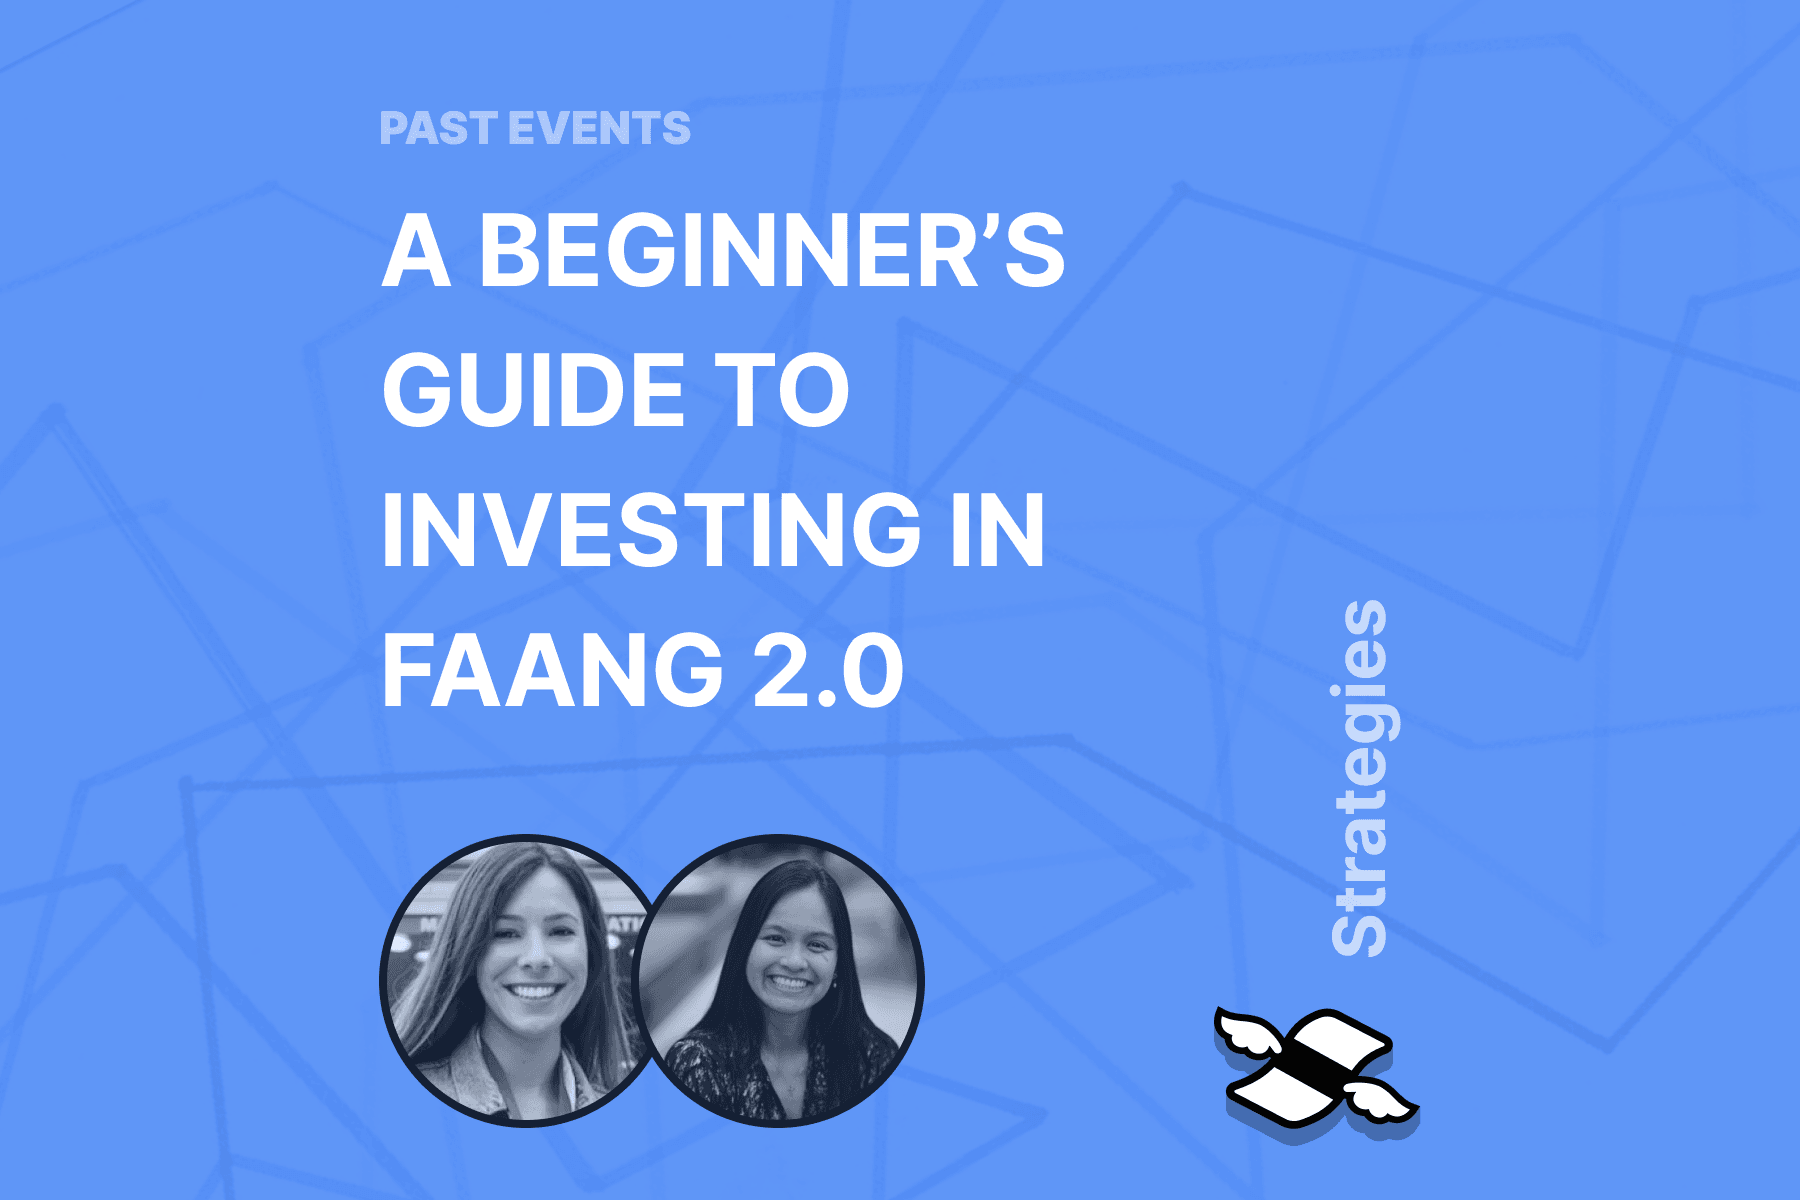 A Beginner's Guide To Investing In FAANG 2.0